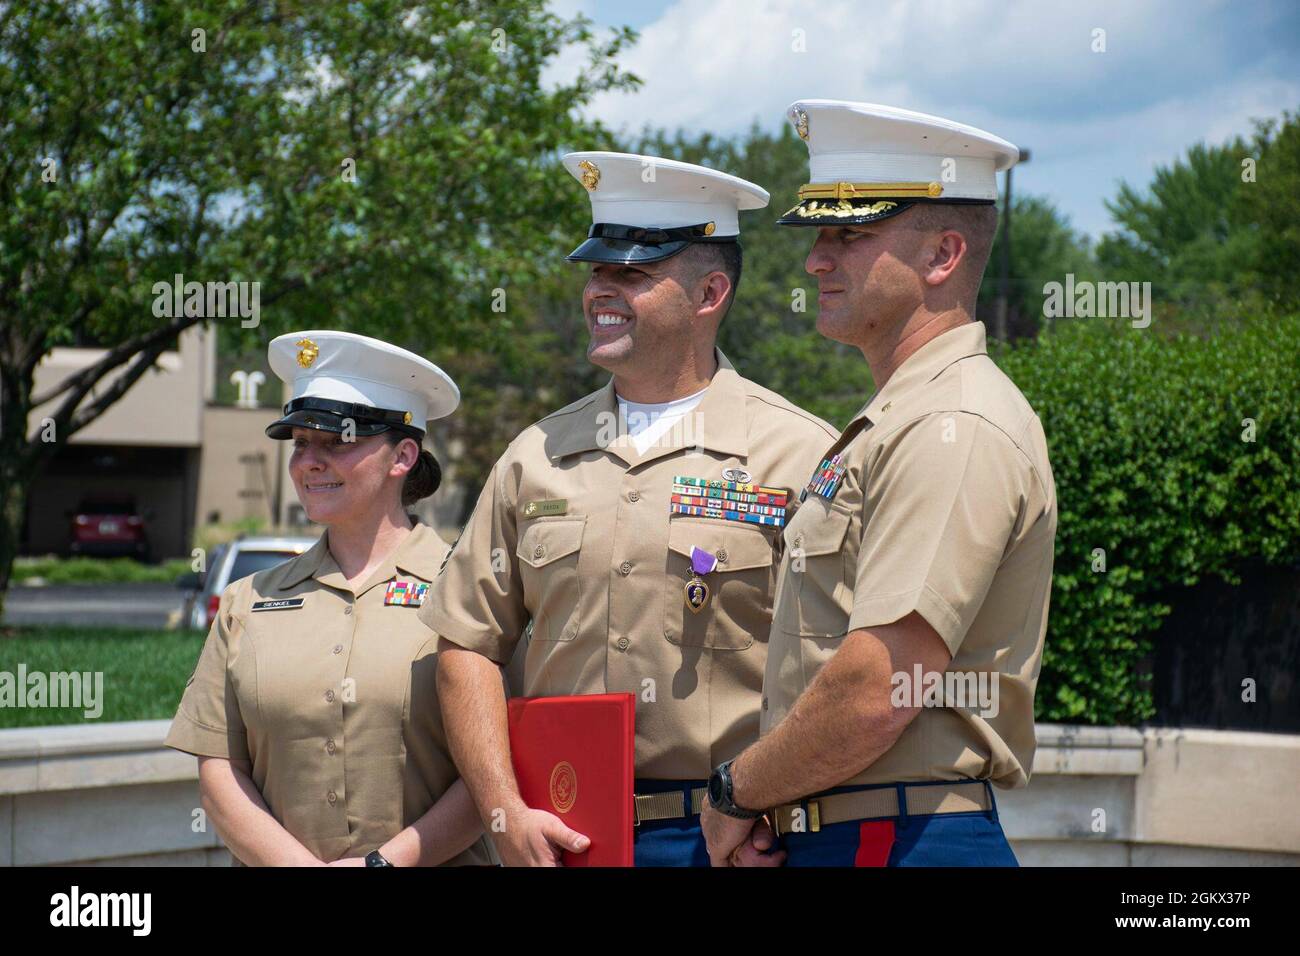 U.S. Marine Master Sgt. Dominic Freda, center, an assistant recruiter instructor with Recruiting Station (RS) Cleveland, Maj. Brian Hubert, right, the commanding officer of RS Cleveland and Sgt. Maj. Rachel Sienkiel, left, the sergeant major of RS Cleveland share a moment during his purple heart ceremony at Veteran’s Memorial Plaza in Livonia, Michigan, July 14, 2021. Freda was serving as weapons platoon sergeant, Company I, 3rd Battalion, 6th Marines, Regimental Combat Team 7, 1st Marine Division, and received wounds in action during Operation Enduring Freedom, May 15, 2010. Stock Photo